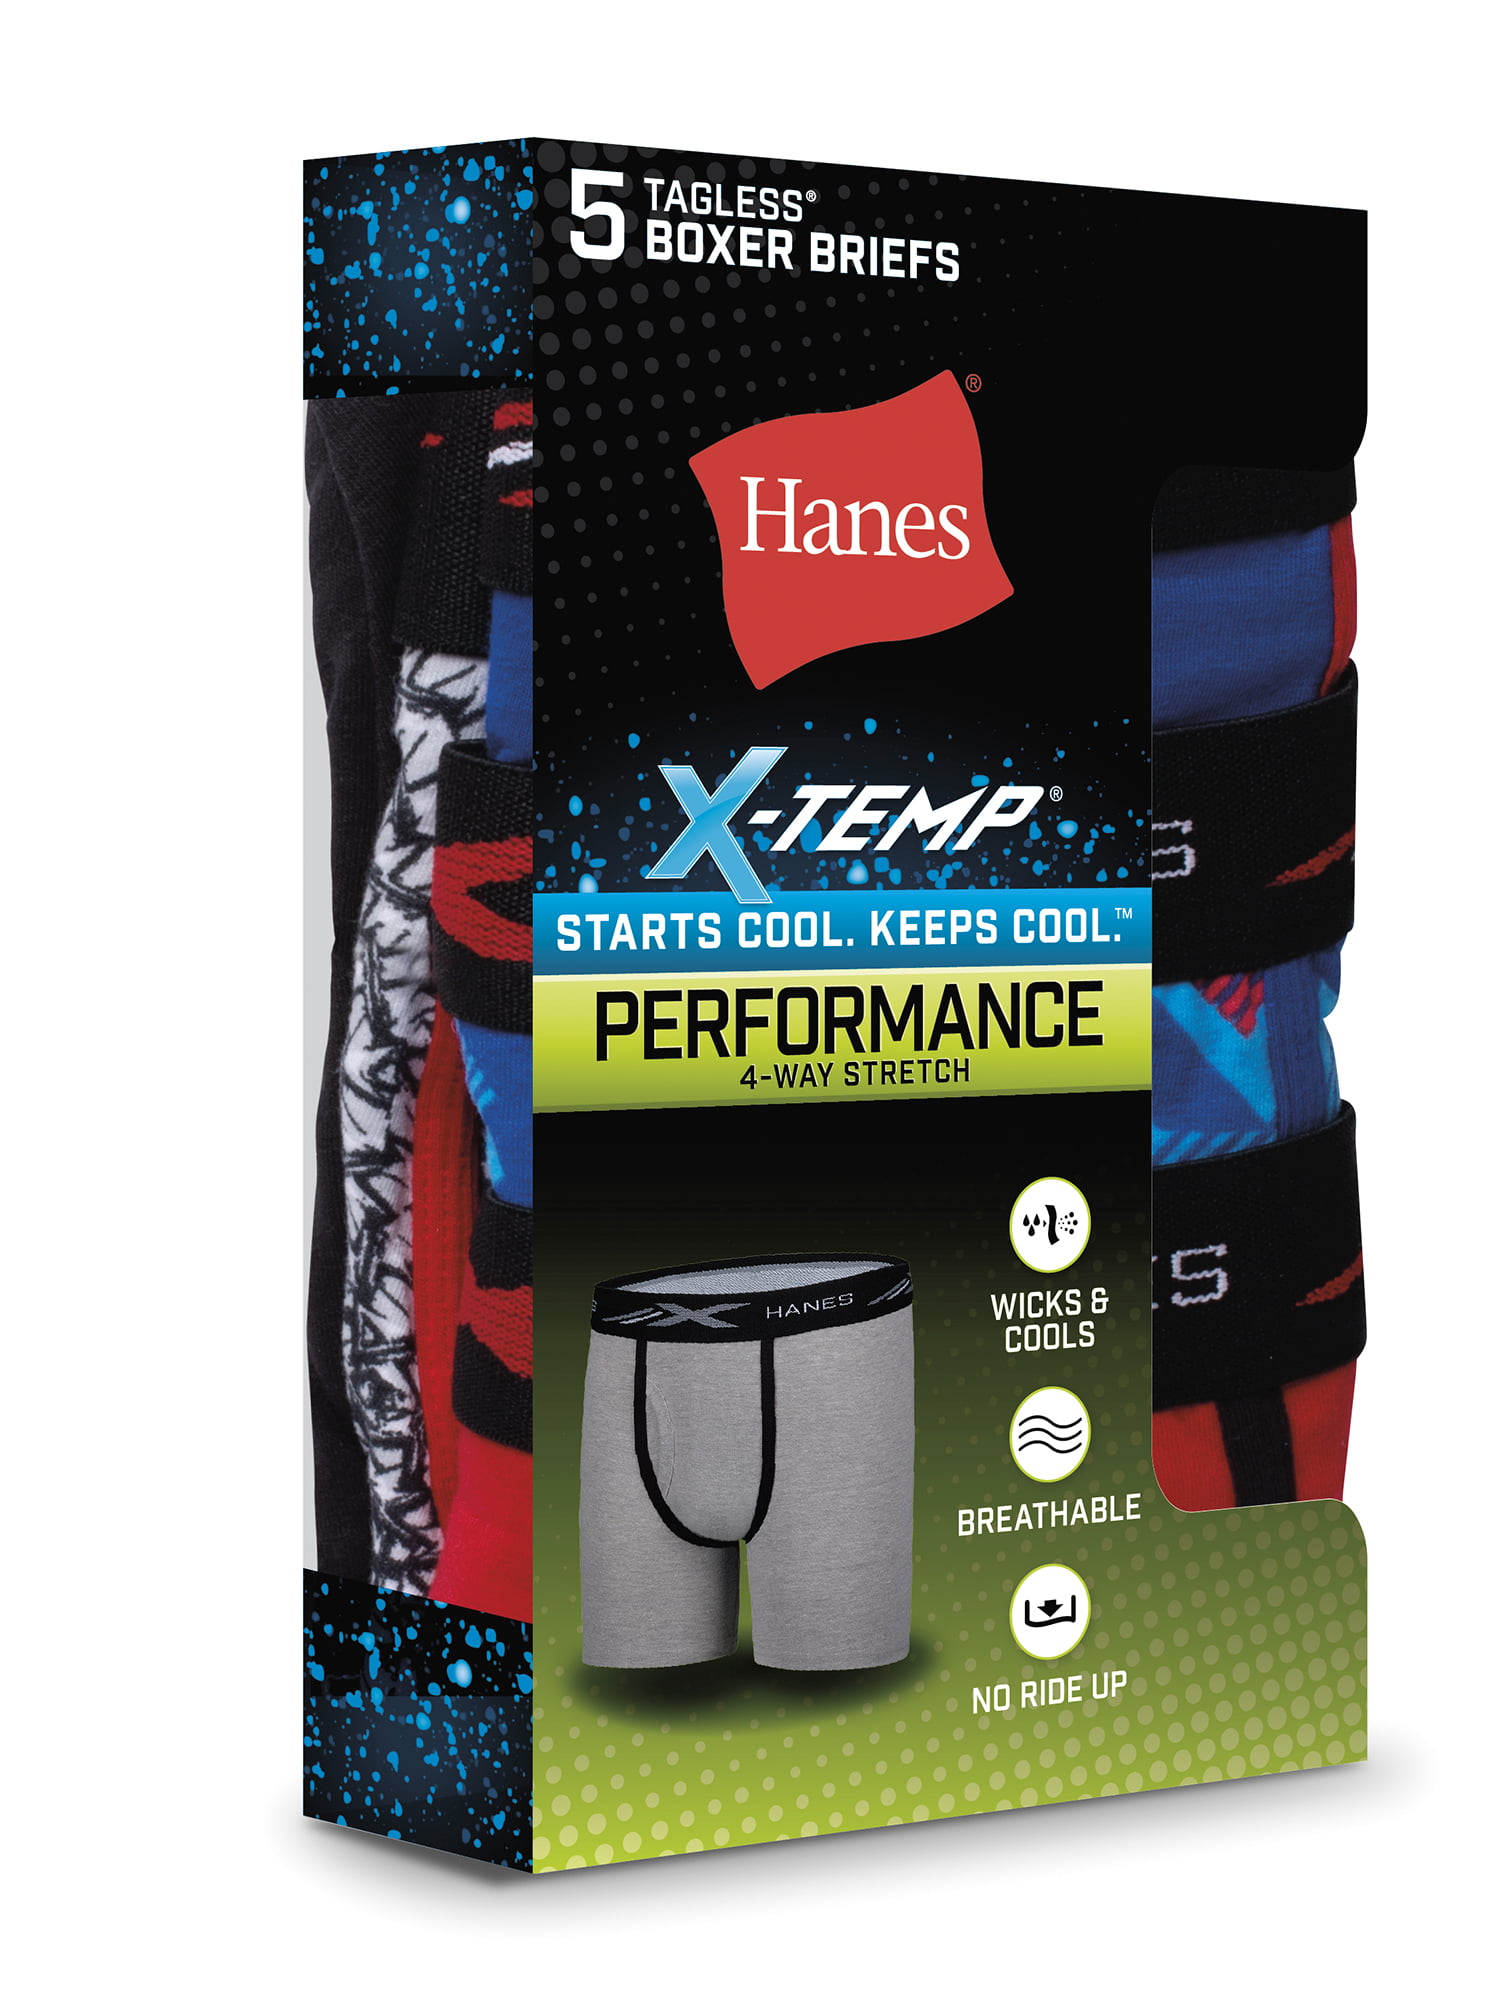 A Brief Breakdance. Brought to you by Hanes X-Temp® underwear